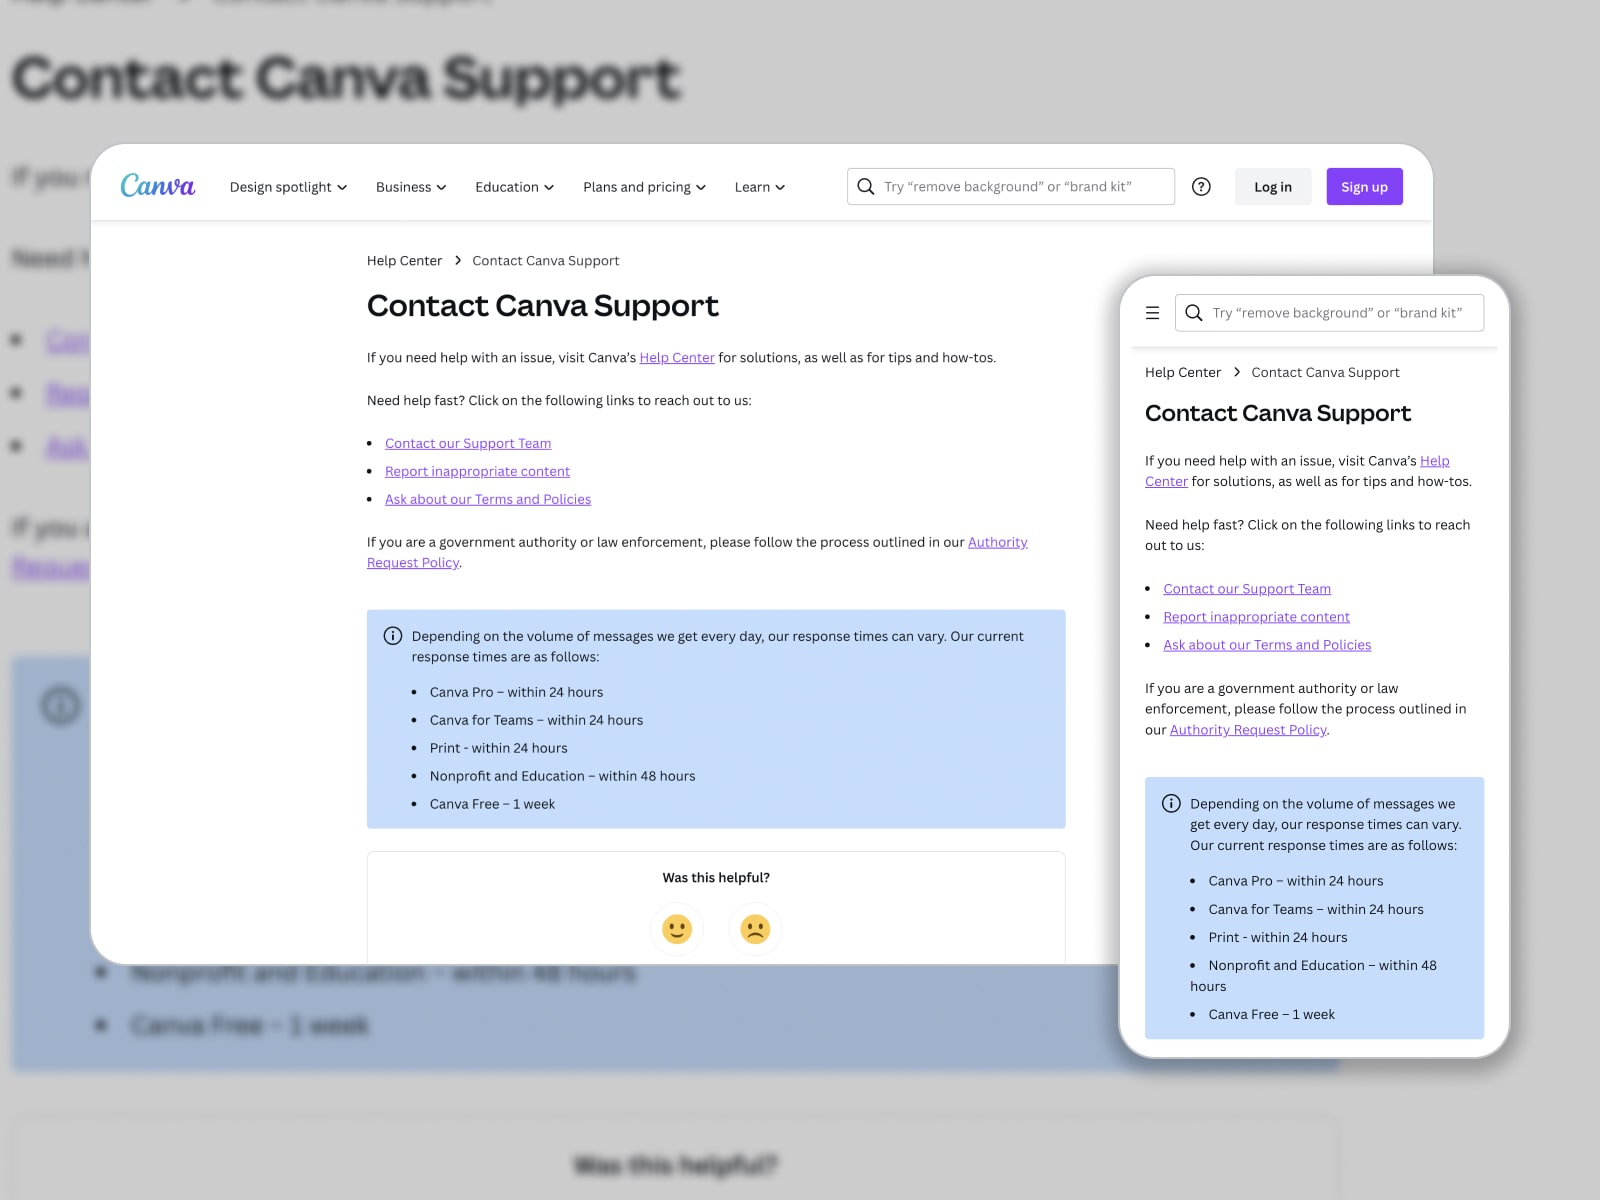 Collage of the Contact Canva support page in white and blue colors.